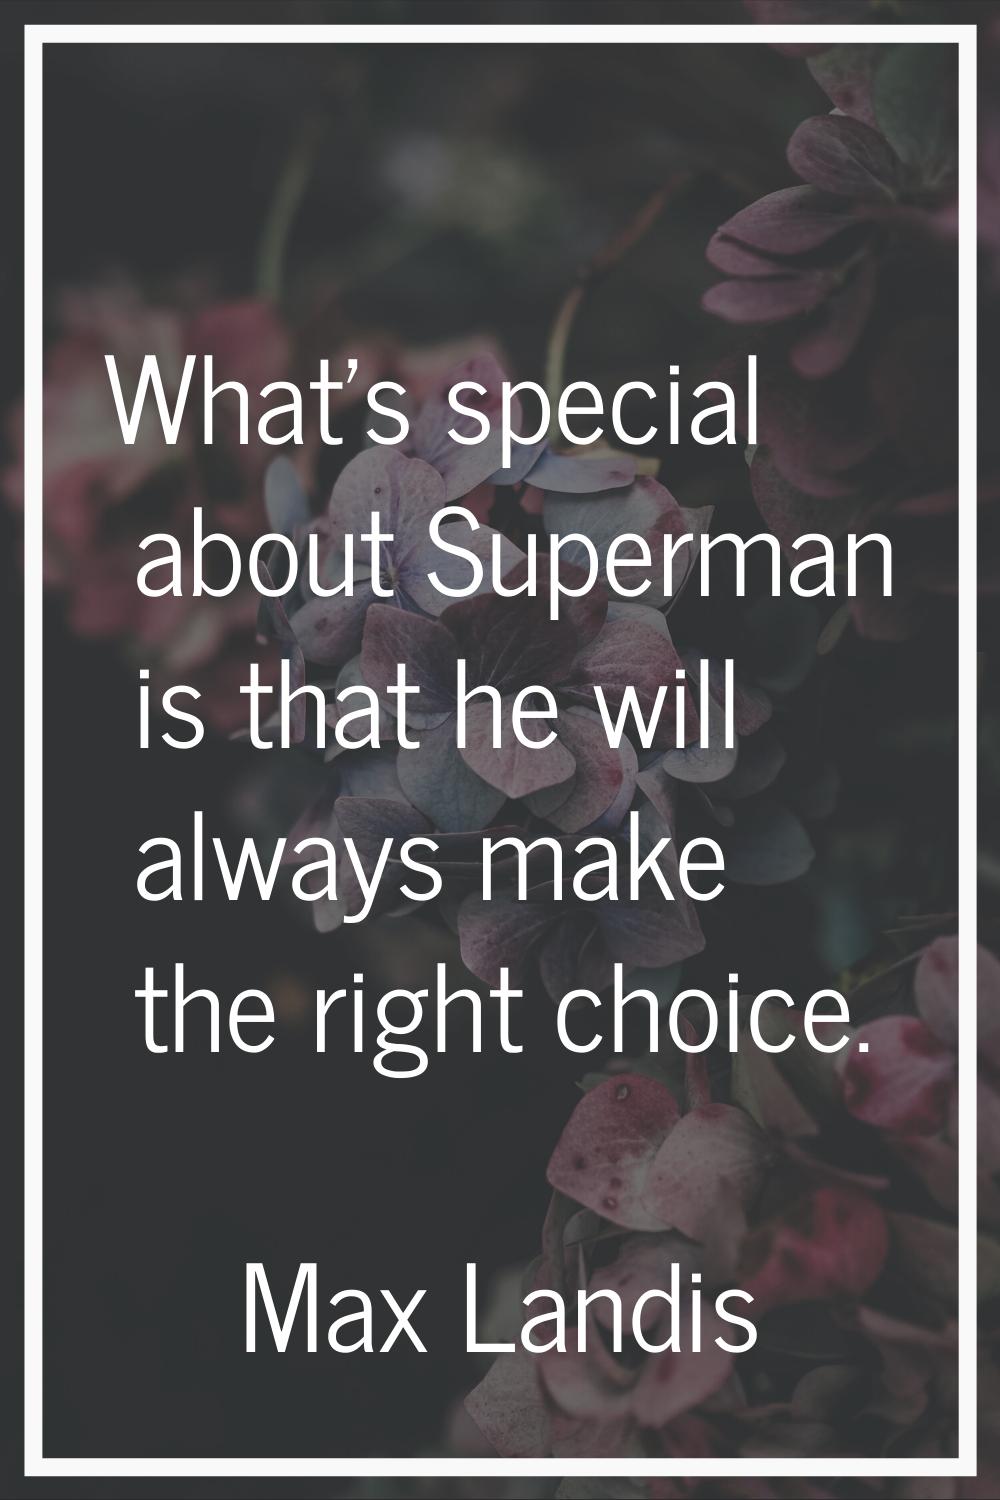 What's special about Superman is that he will always make the right choice.